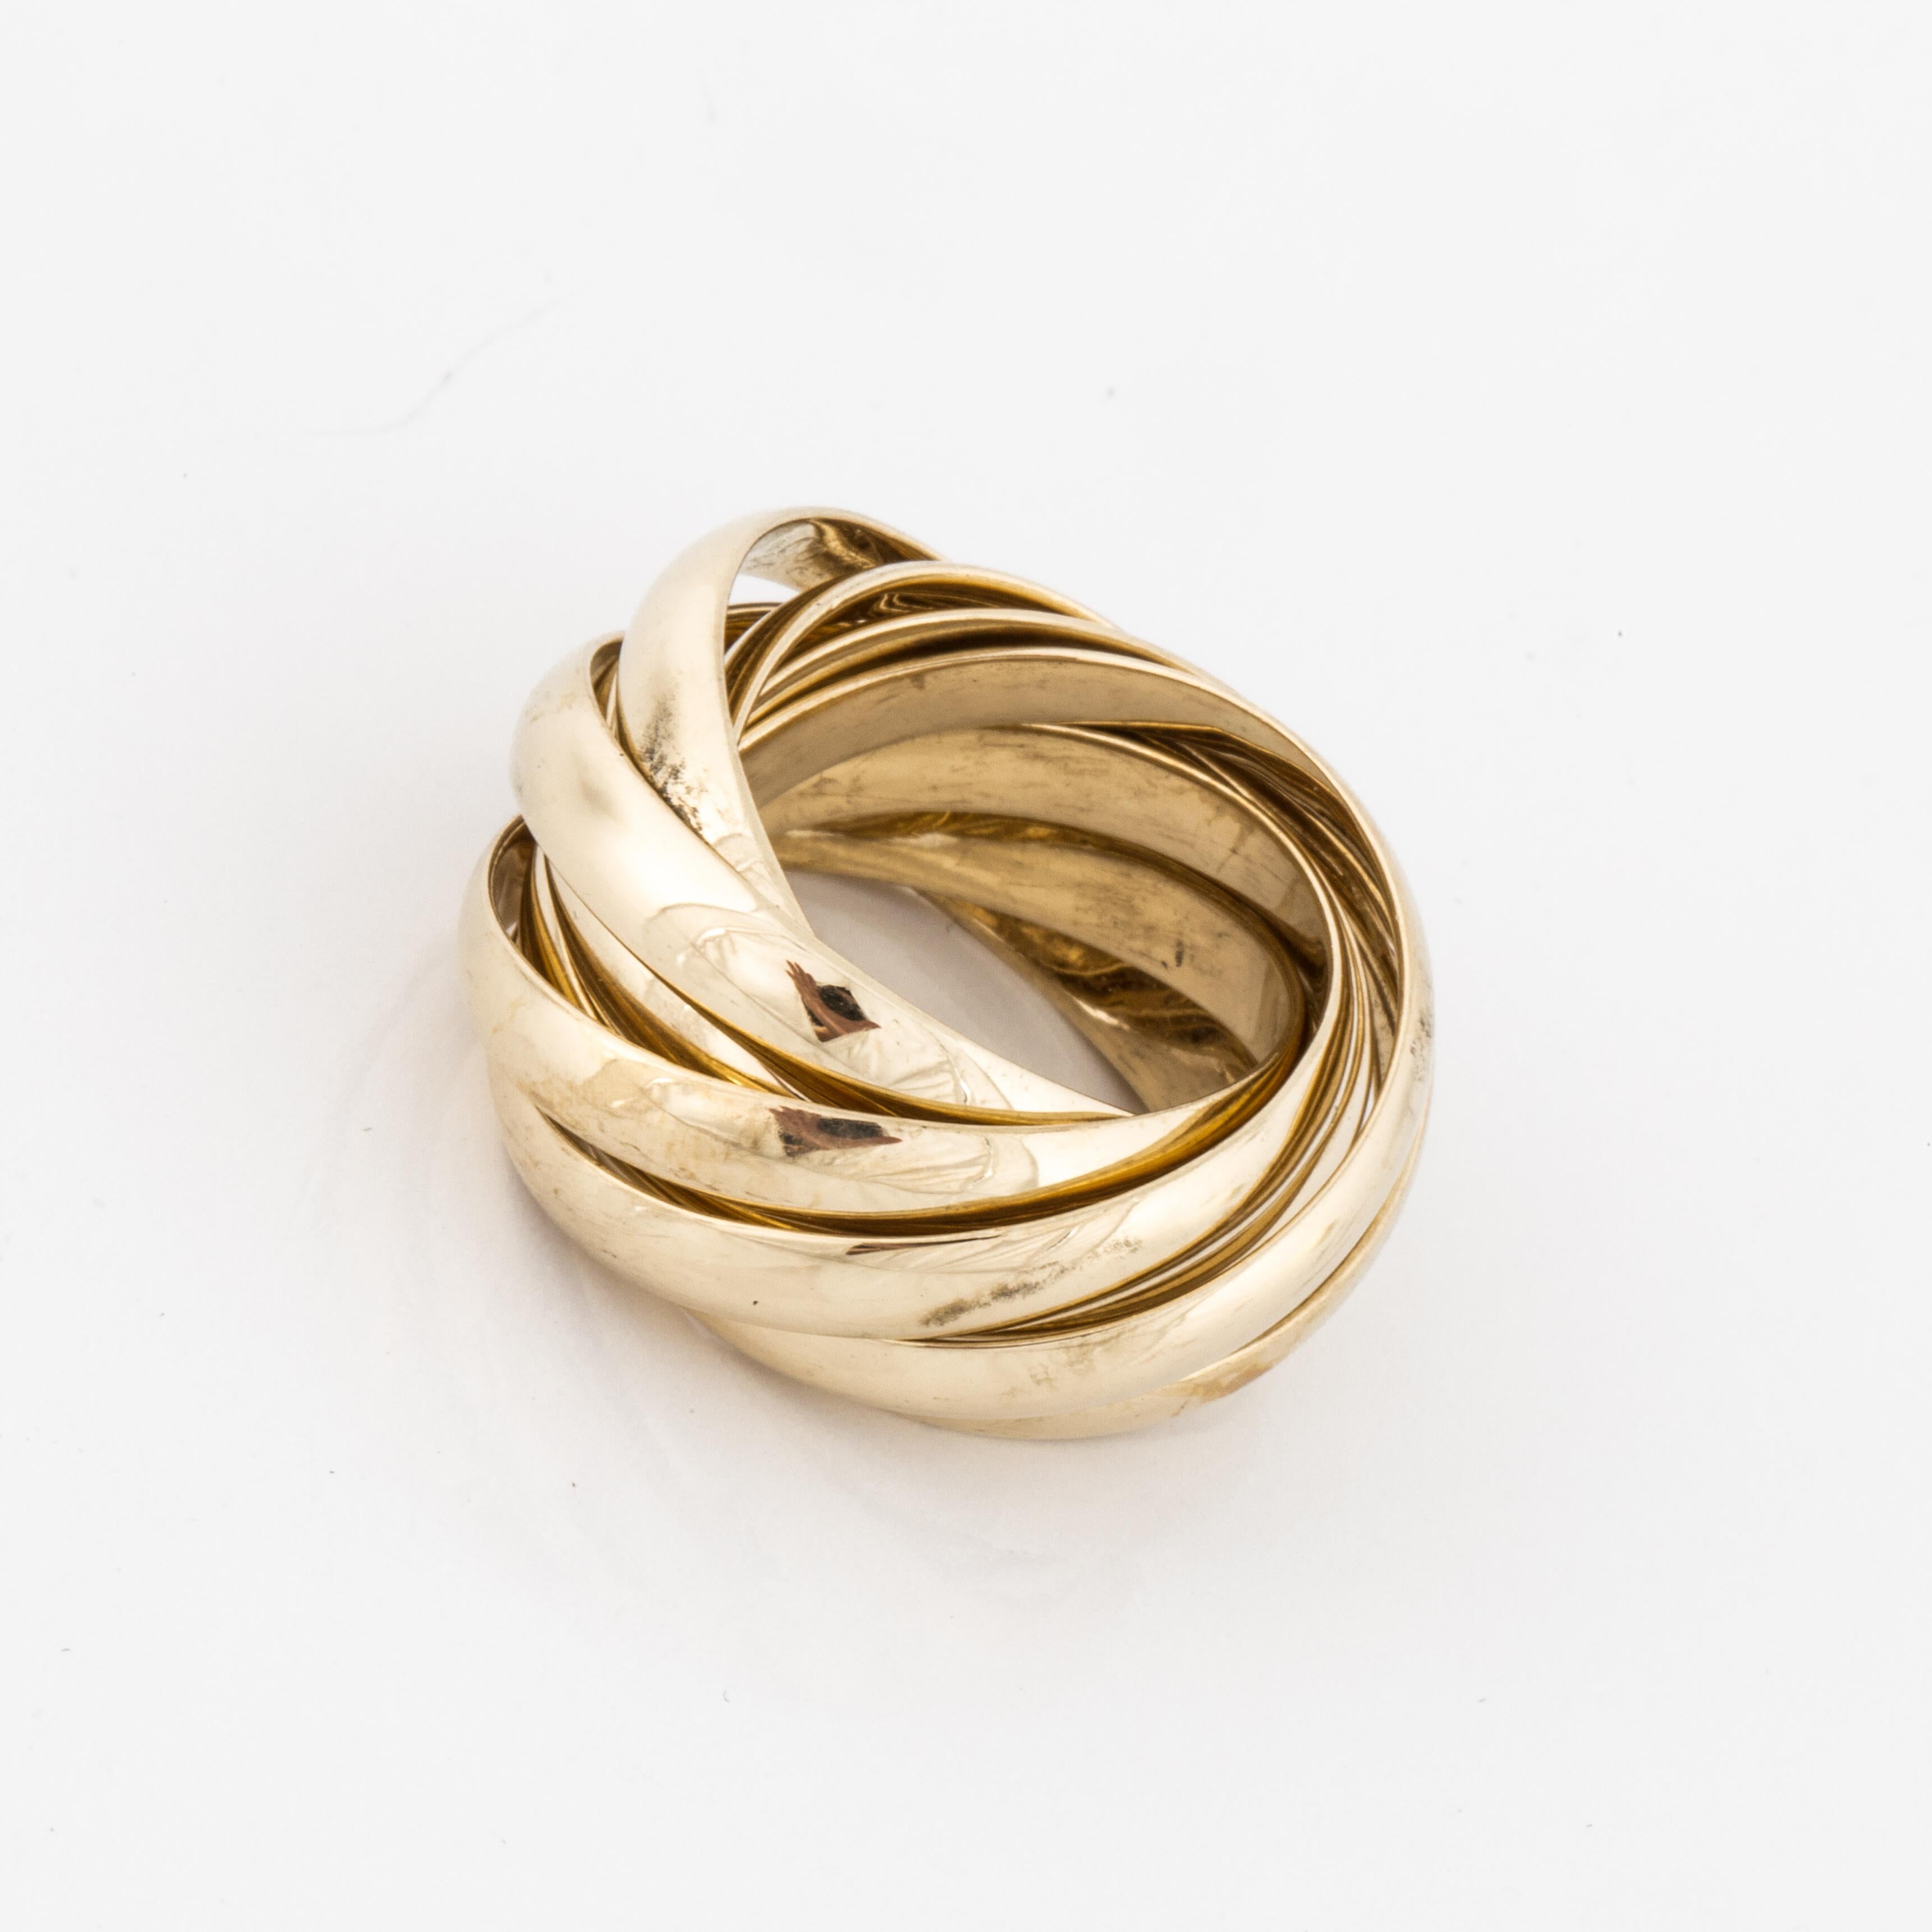 18K yellow gold Calife ring by Paloma Picasso for Tiffany & Co.  Features nine (9) bands measuring 1/8